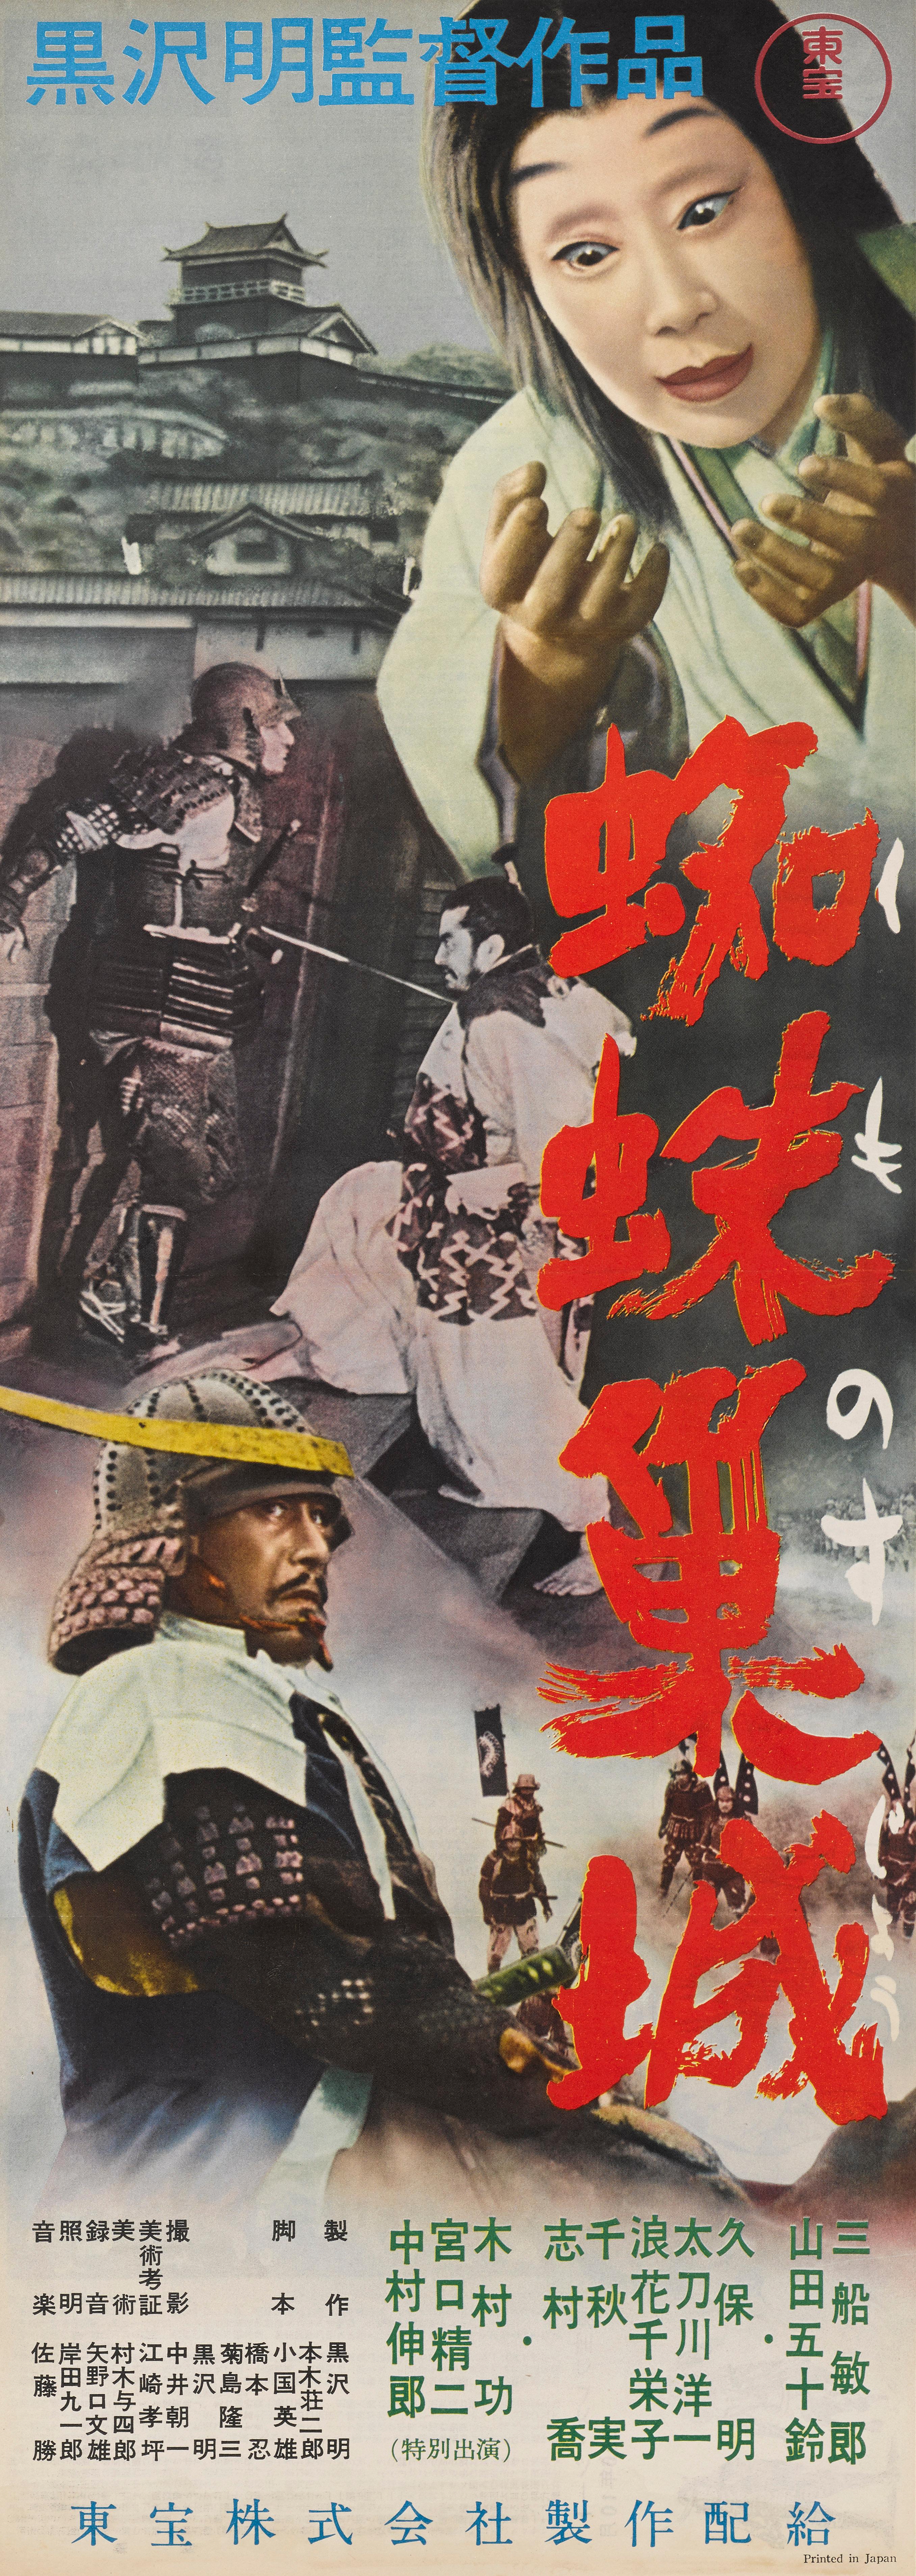 throne of blood poster